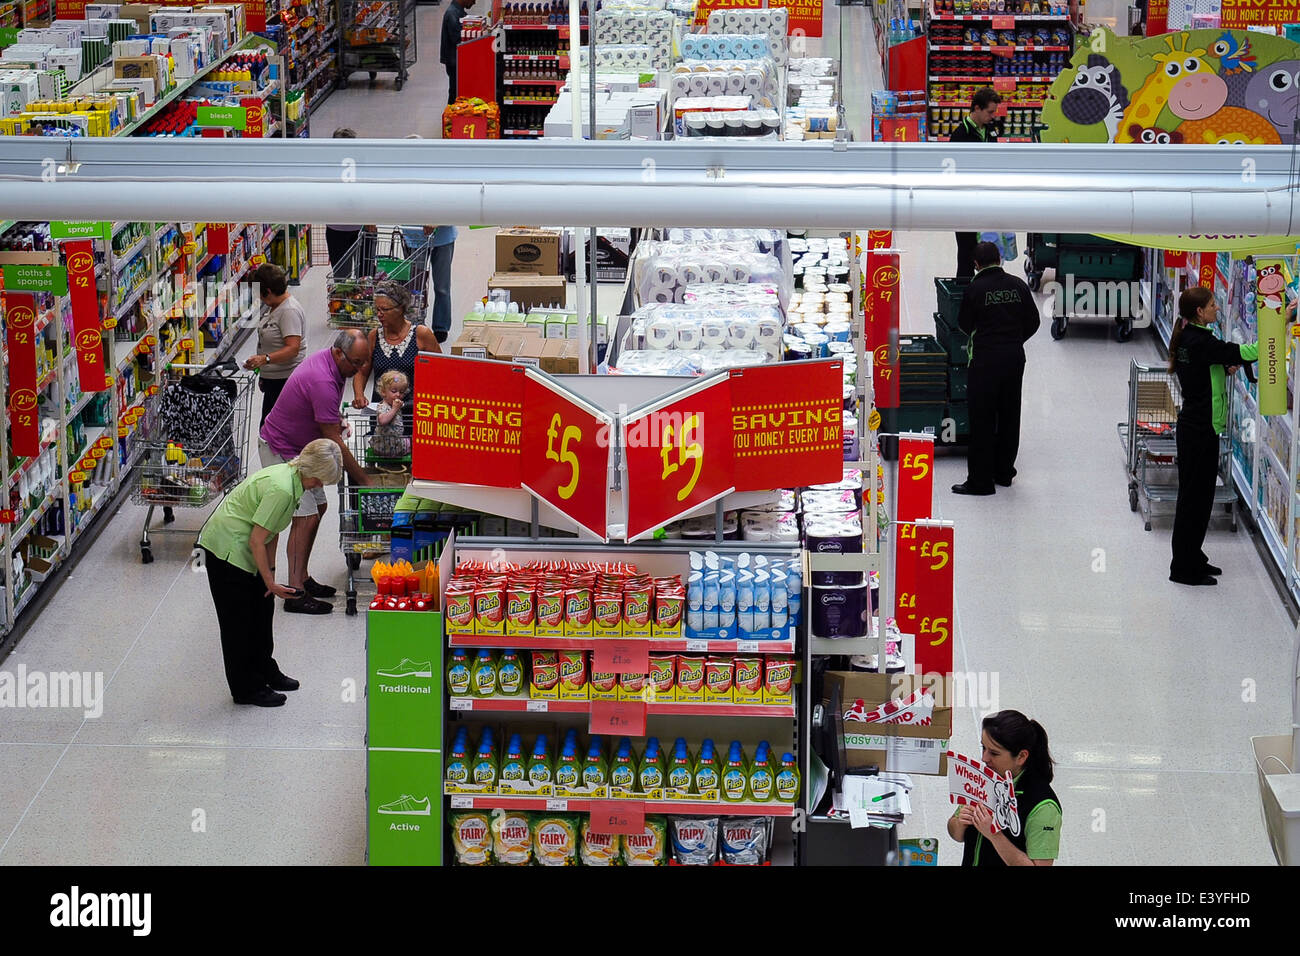 interior of supermarket showing staff re-stocking shelves Stock Photo